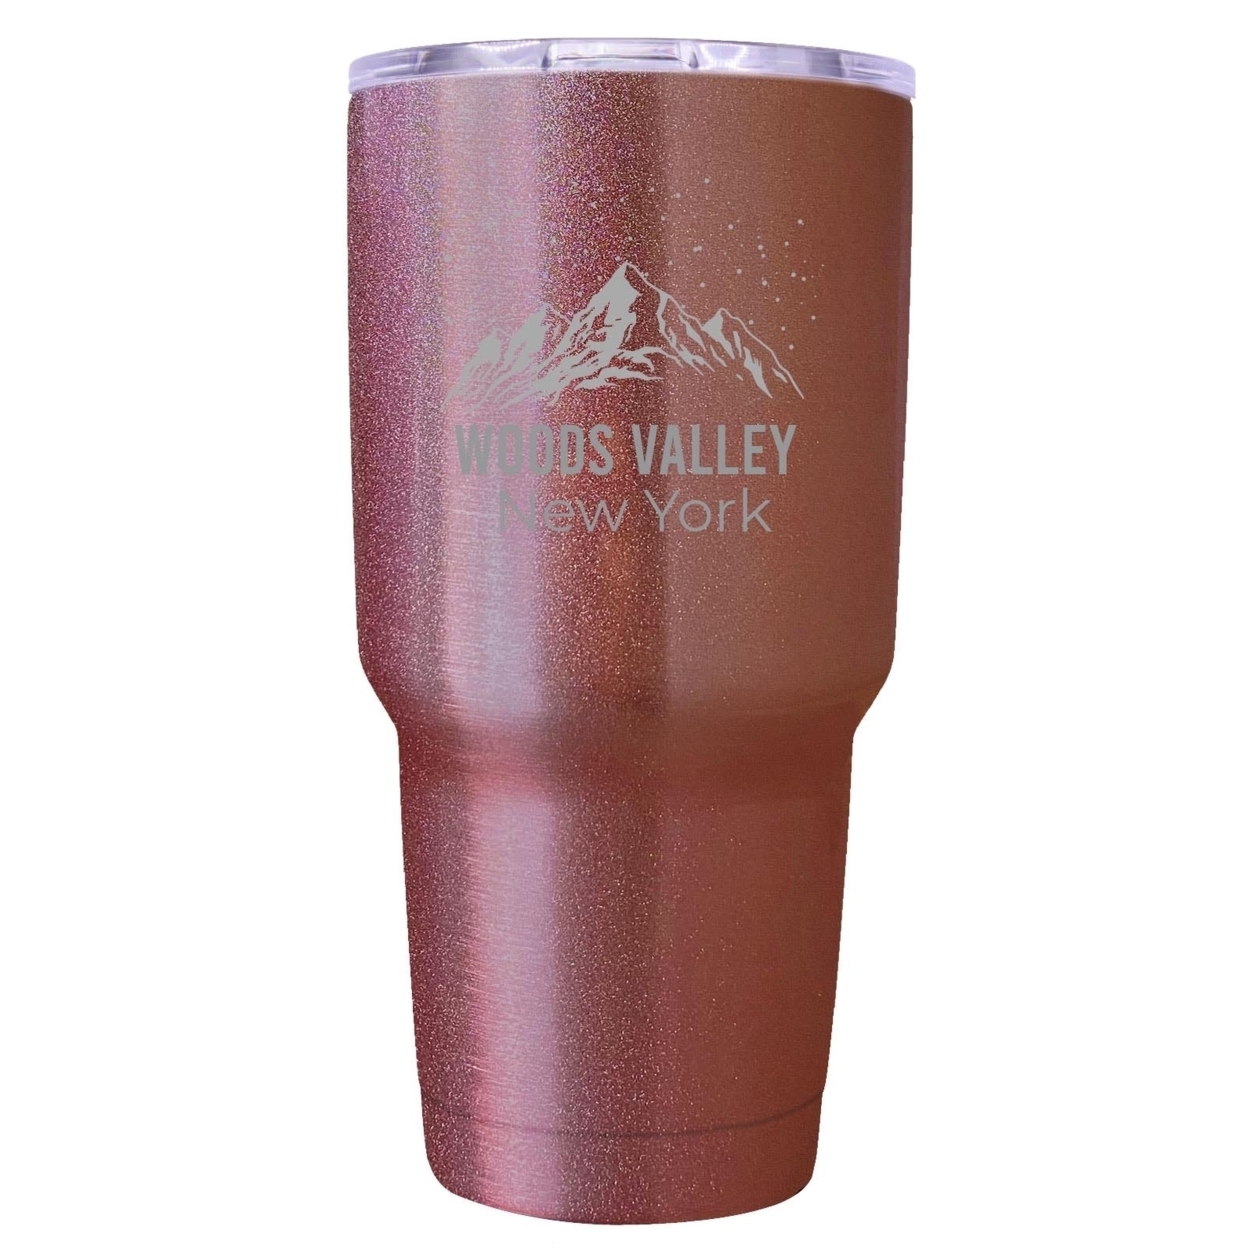 Woods Valley New York Ski Snowboard Winter Souvenir Laser Engraved 24 Oz Insulated Stainless Steel Tumbler - Rose Gold